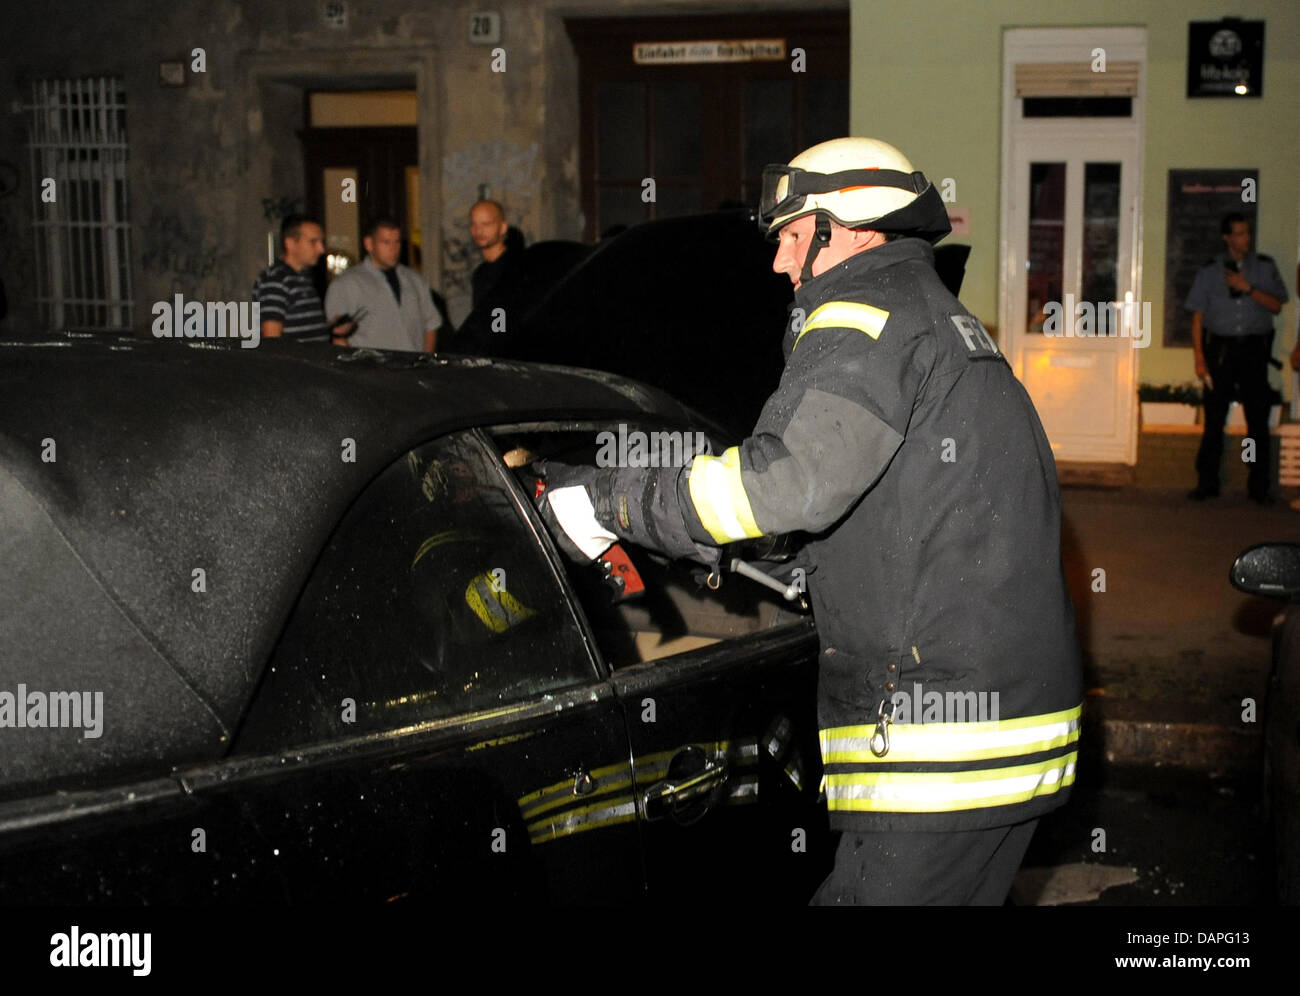 A fireman puts out the flames from a burning car in Berlin, Germany, 18 August 2011. Overnight, cars in several districts of Berlin were set on fire. The series of arson has reached a peak point with the fires of that night. According to the police, eleven cars were set on fire and another one was damaged. Photo: Britta Pedersen Stock Photo